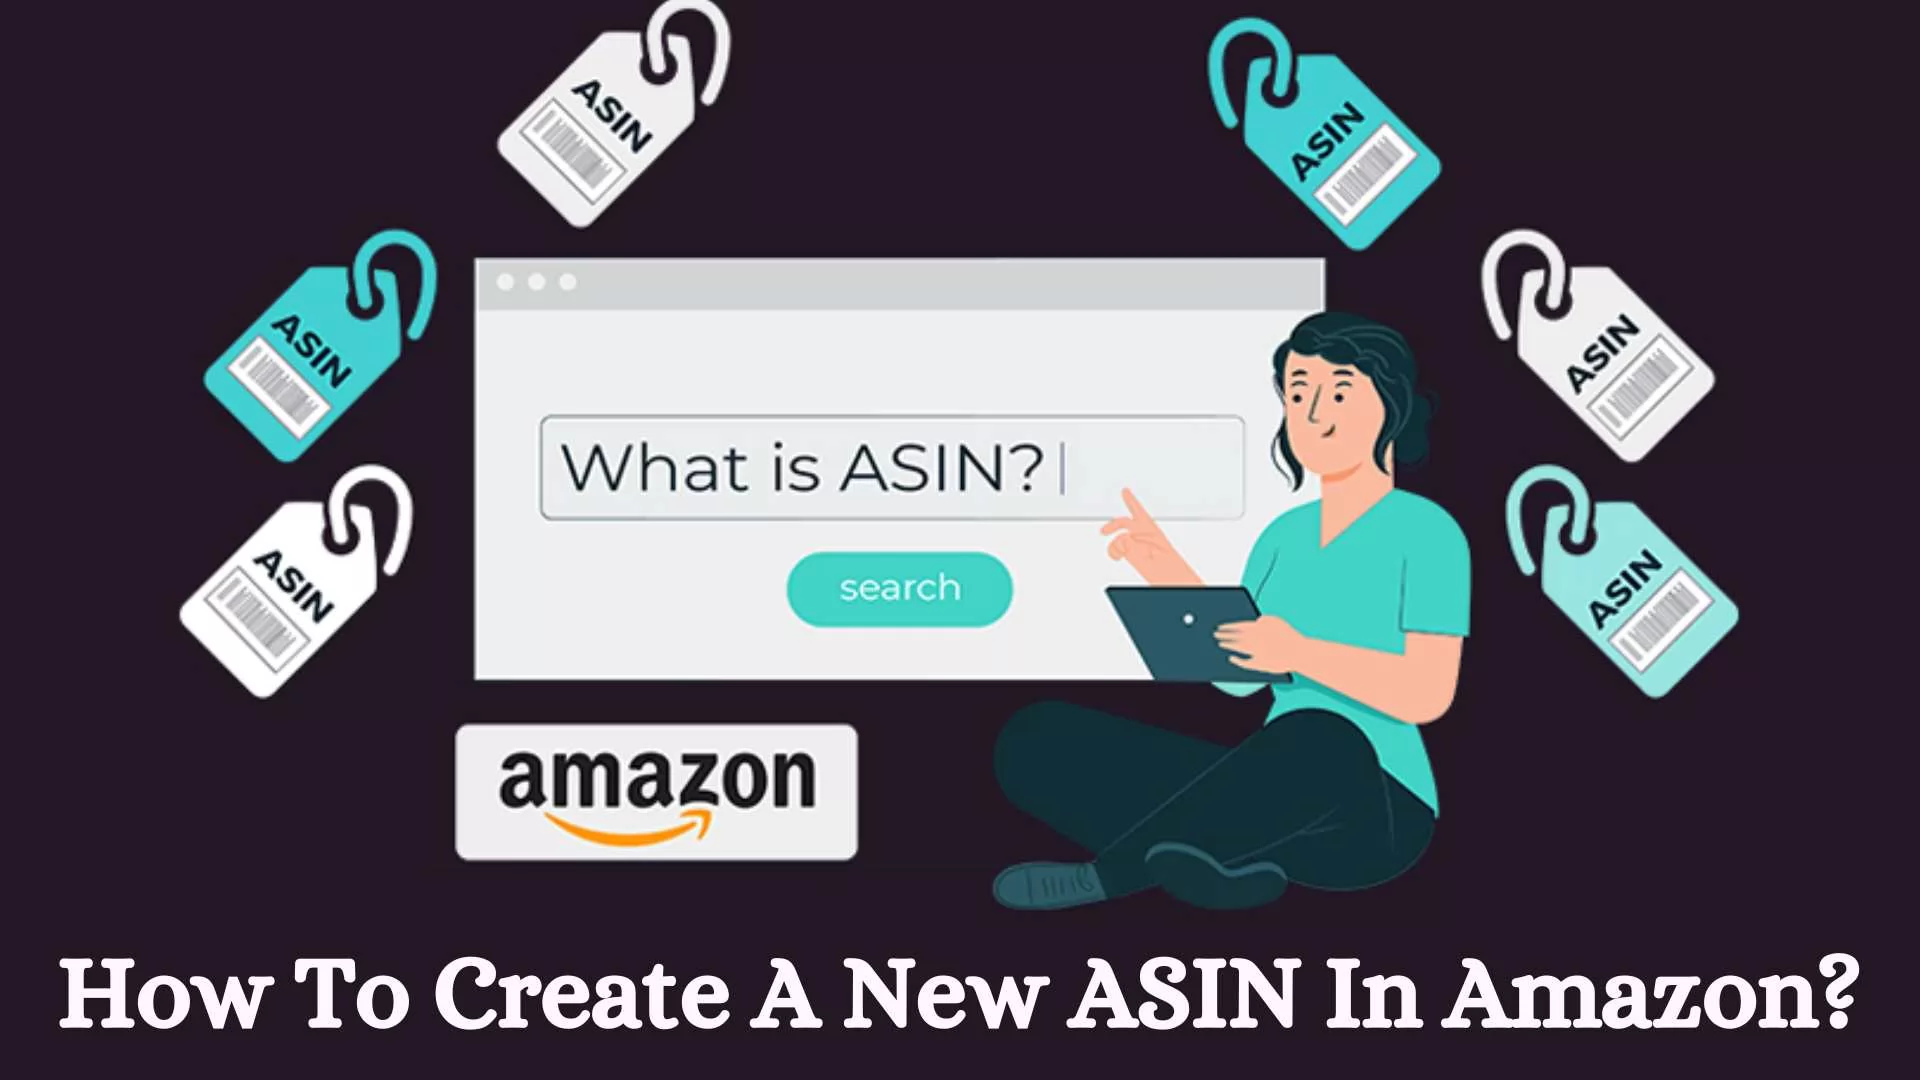 How To Create A New ASIN In Amazon?